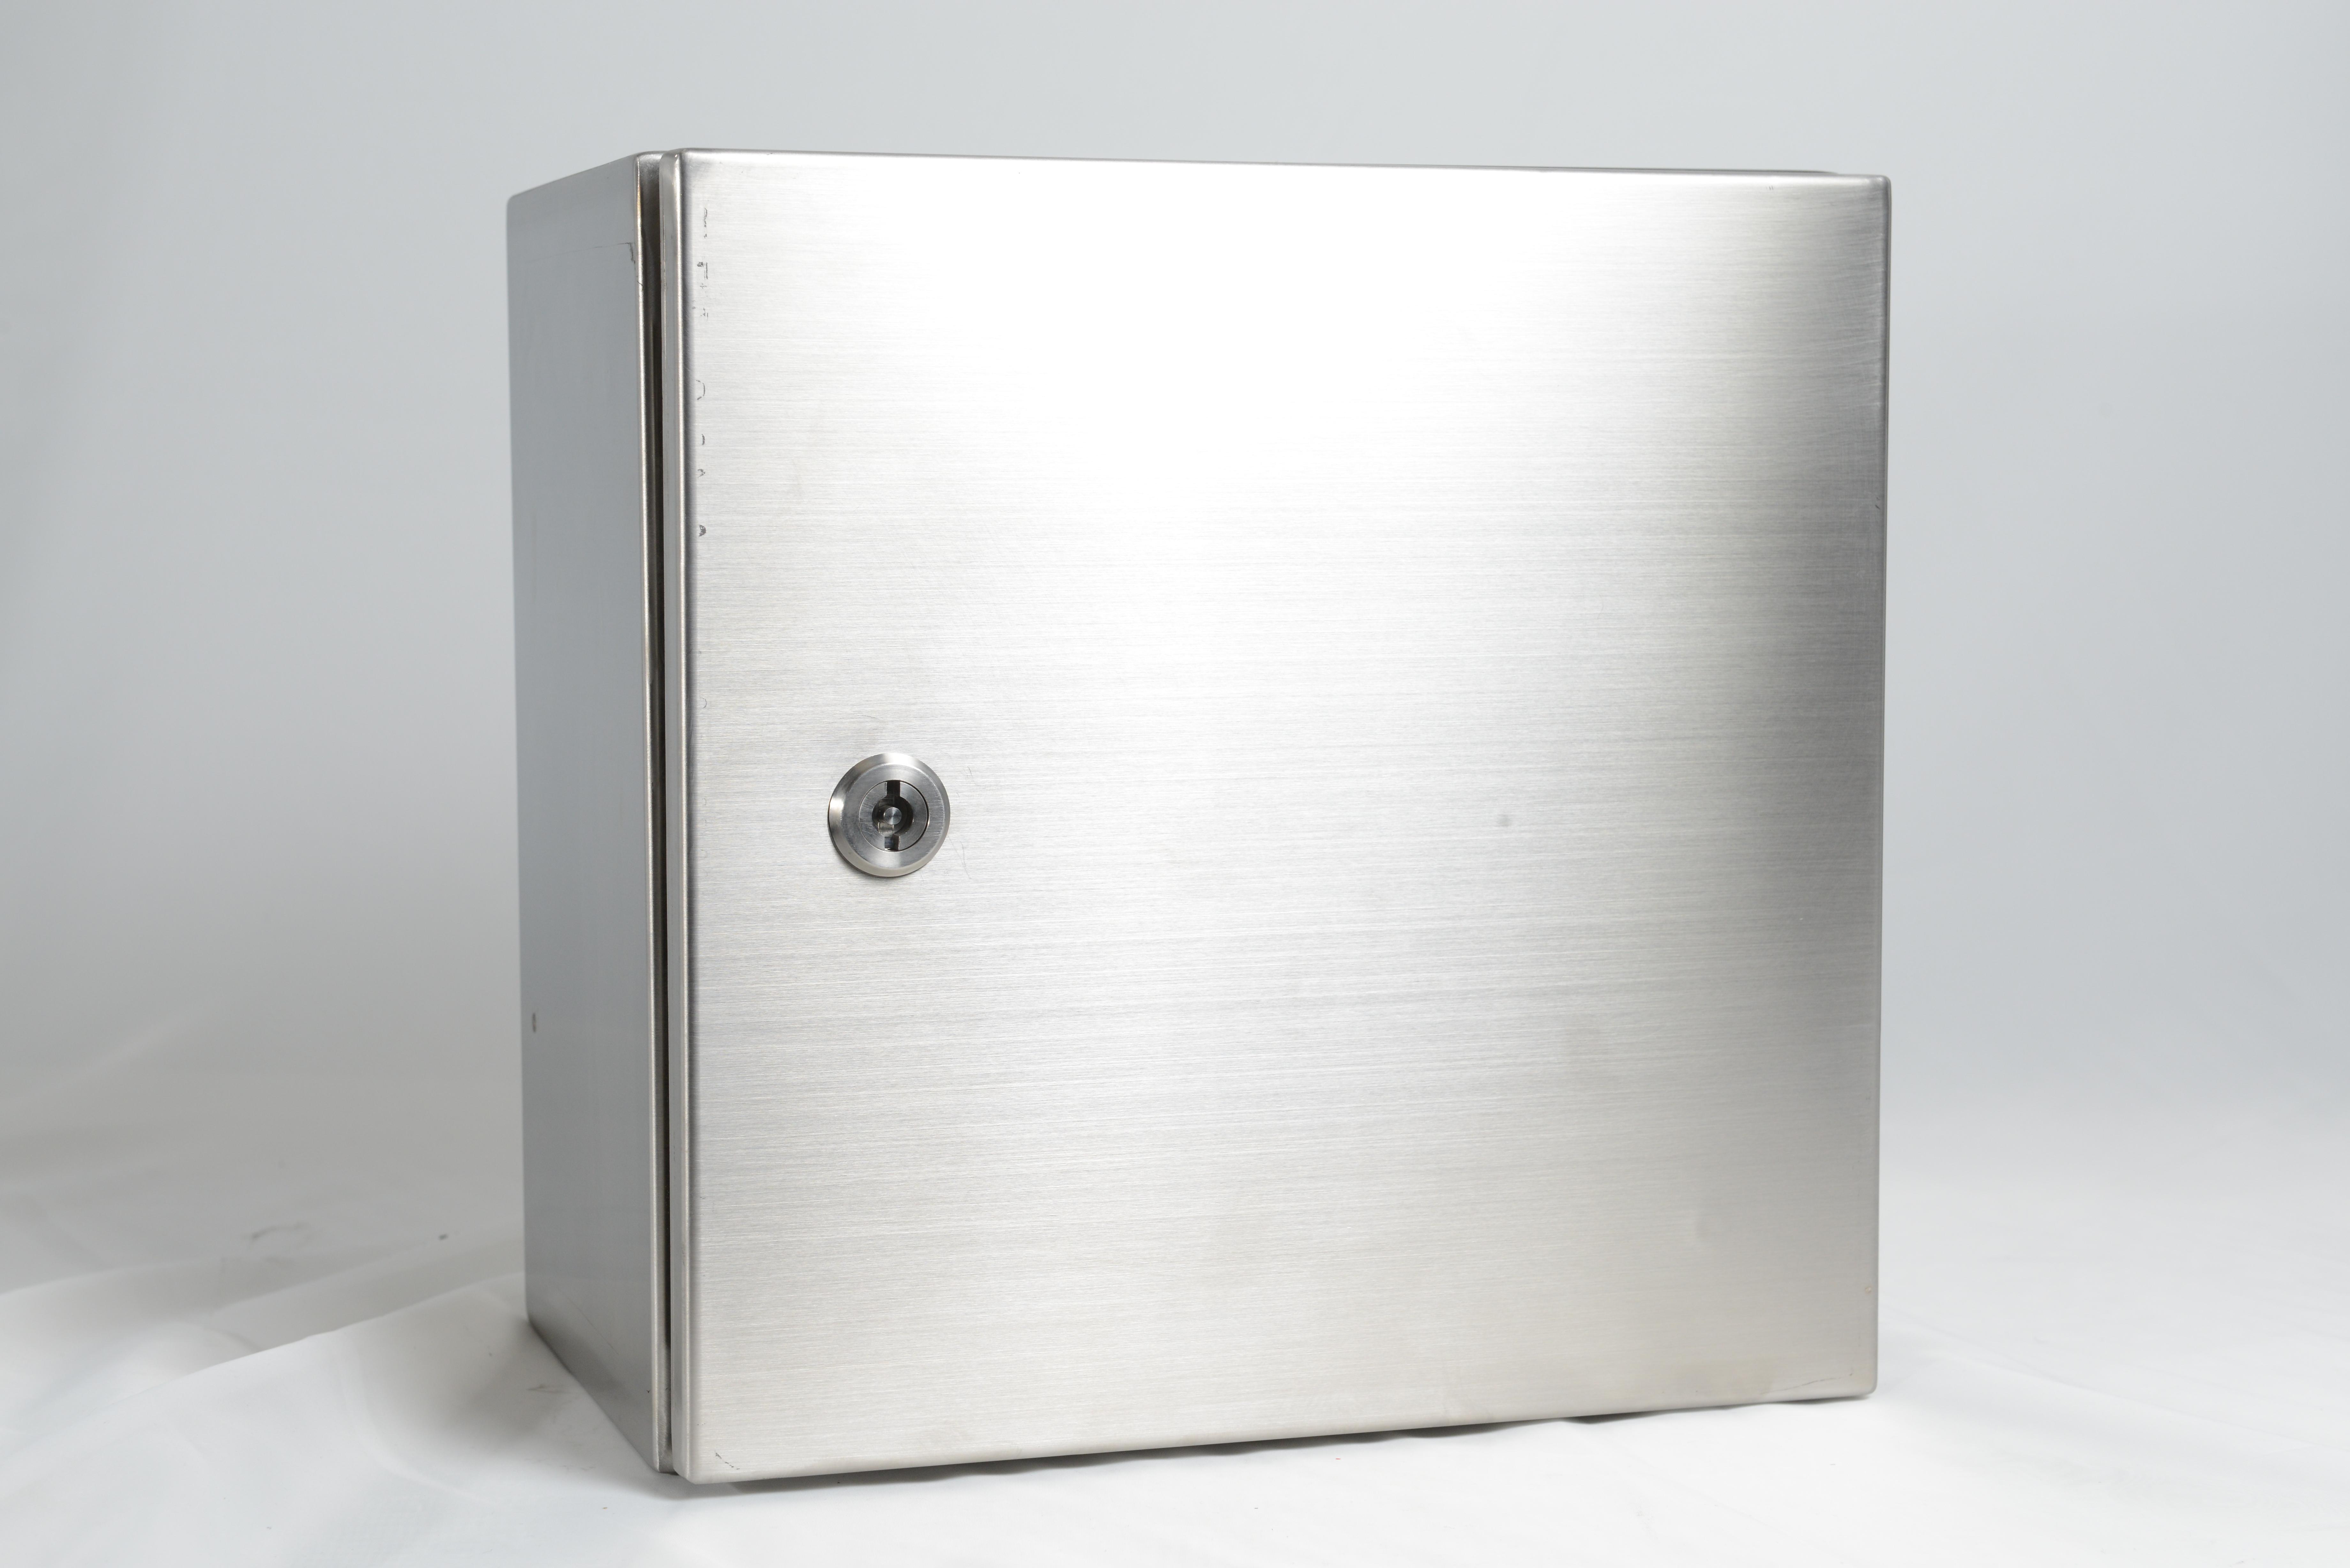 RCG stainless steel enclosure 316 grade 300x200x200mm - wall mounting